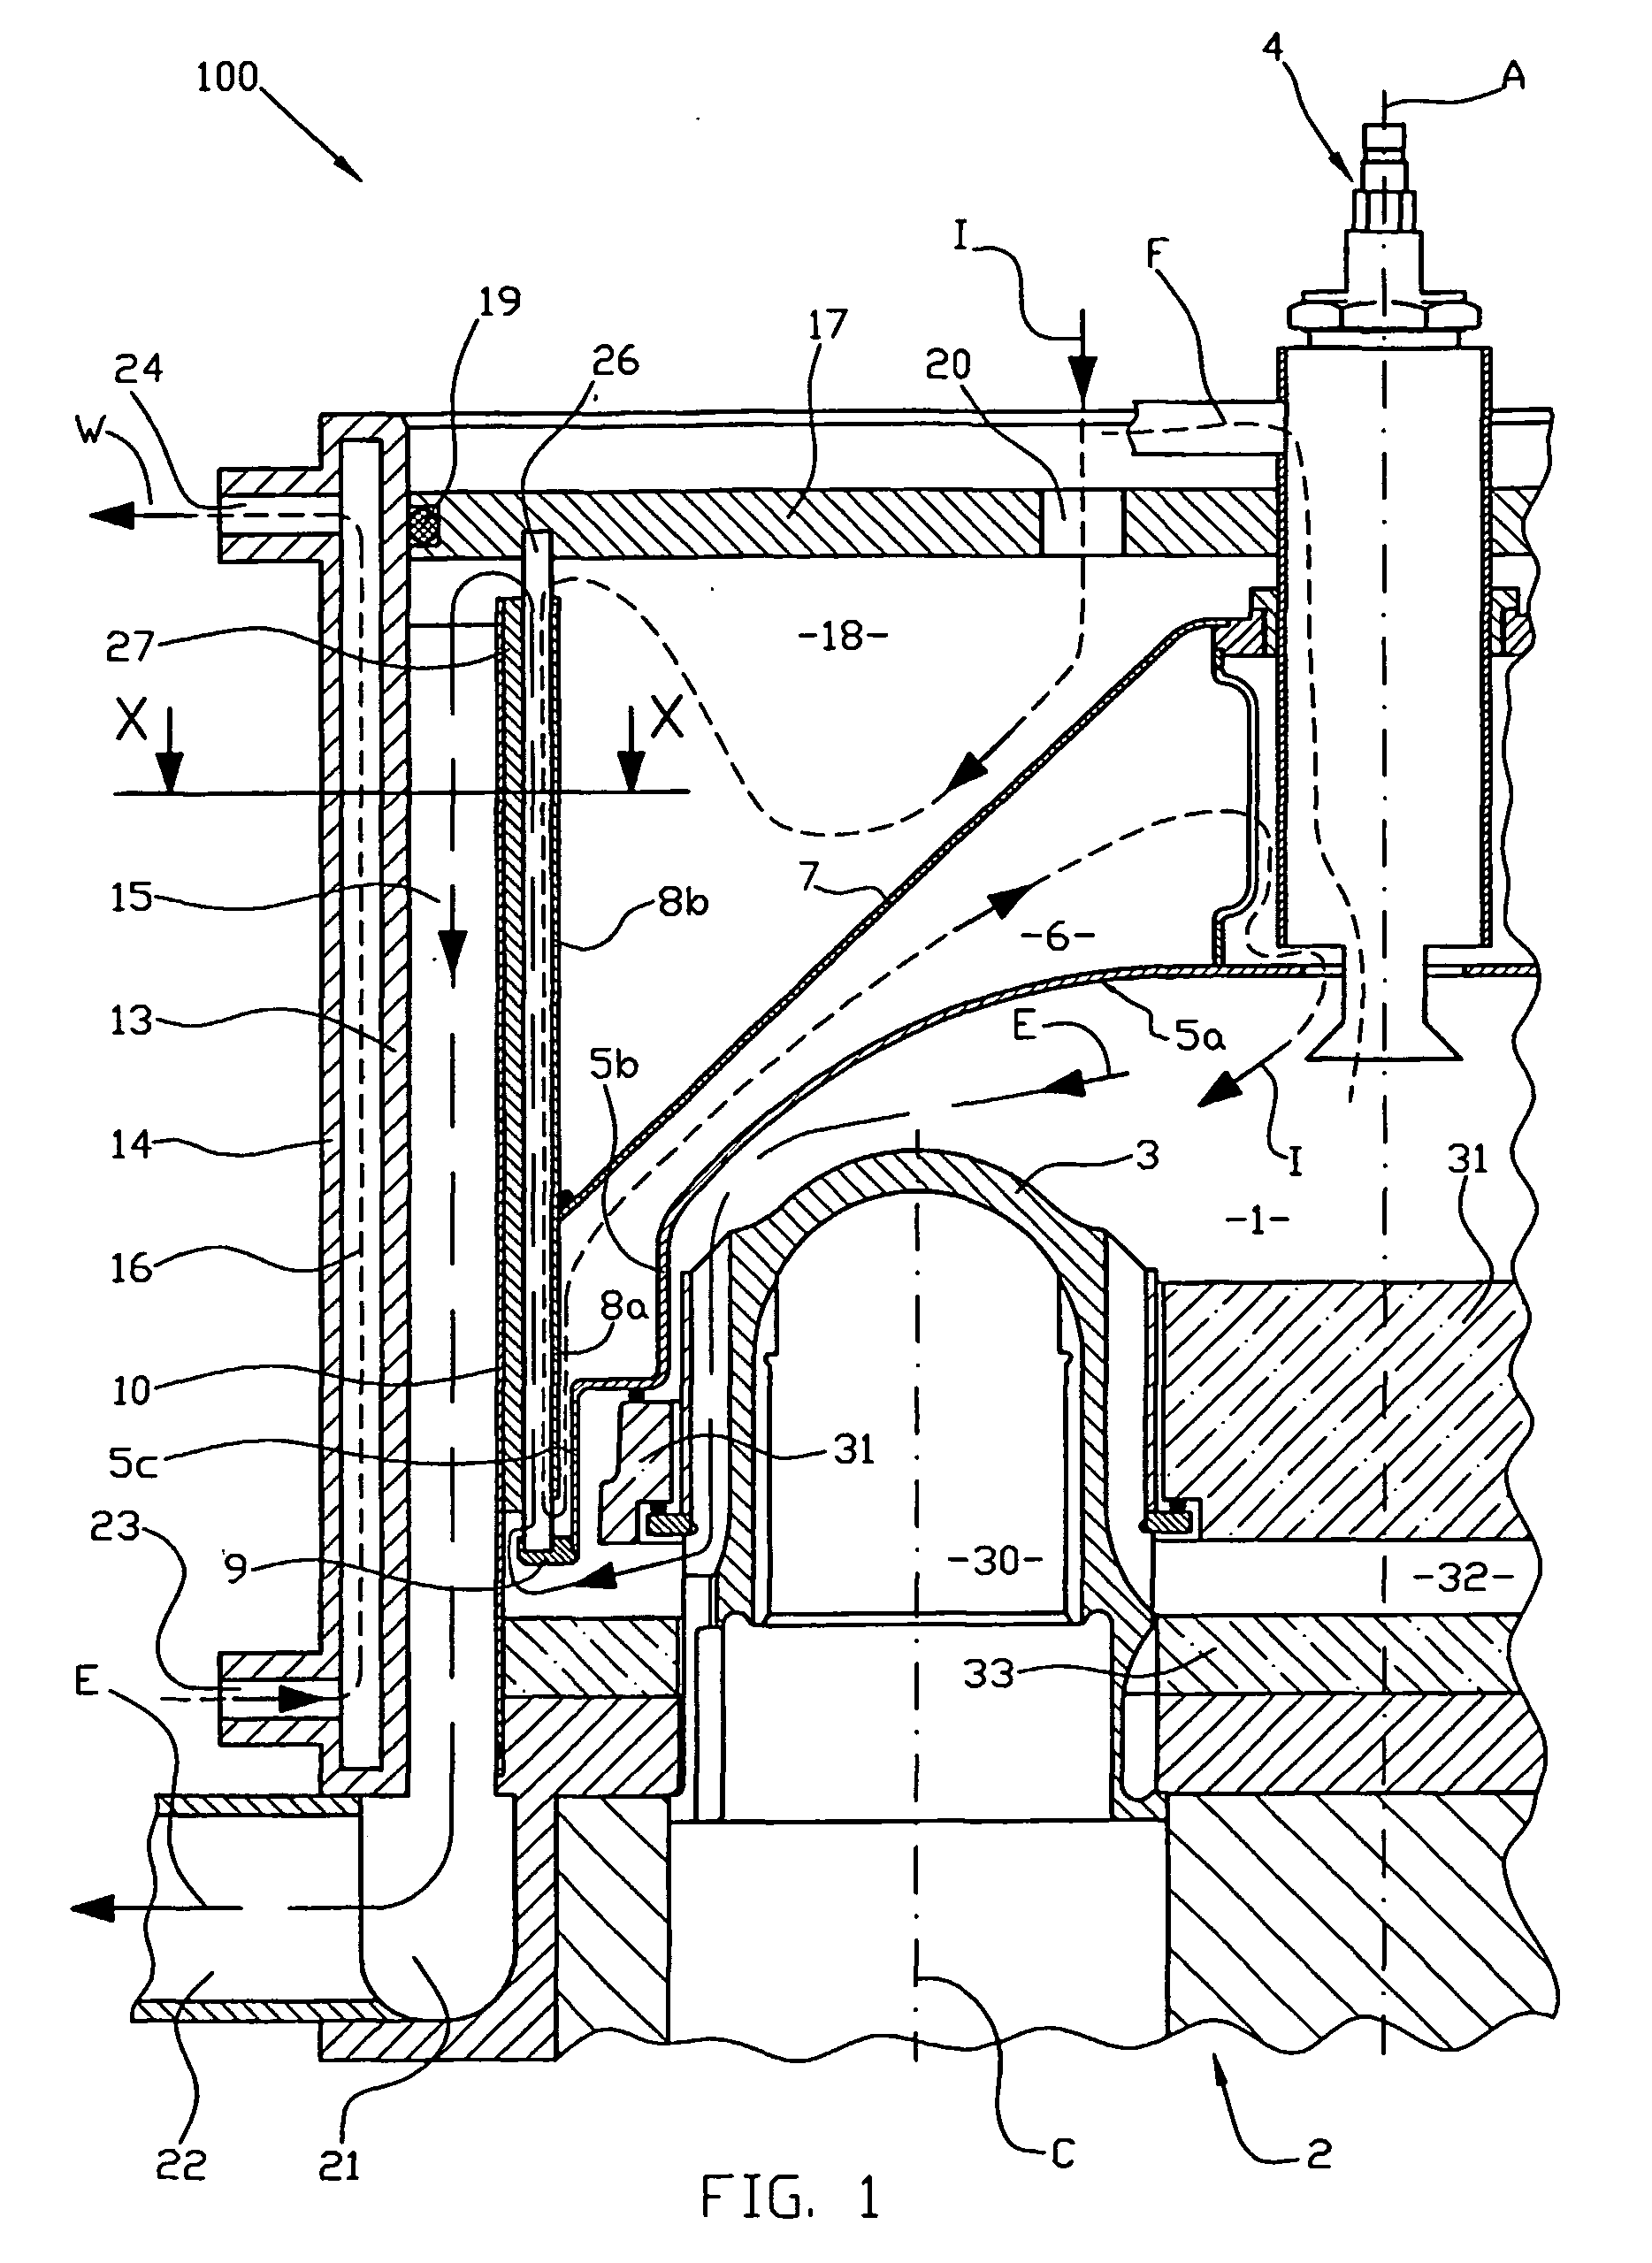 Recuperative heater for an external combustion engine